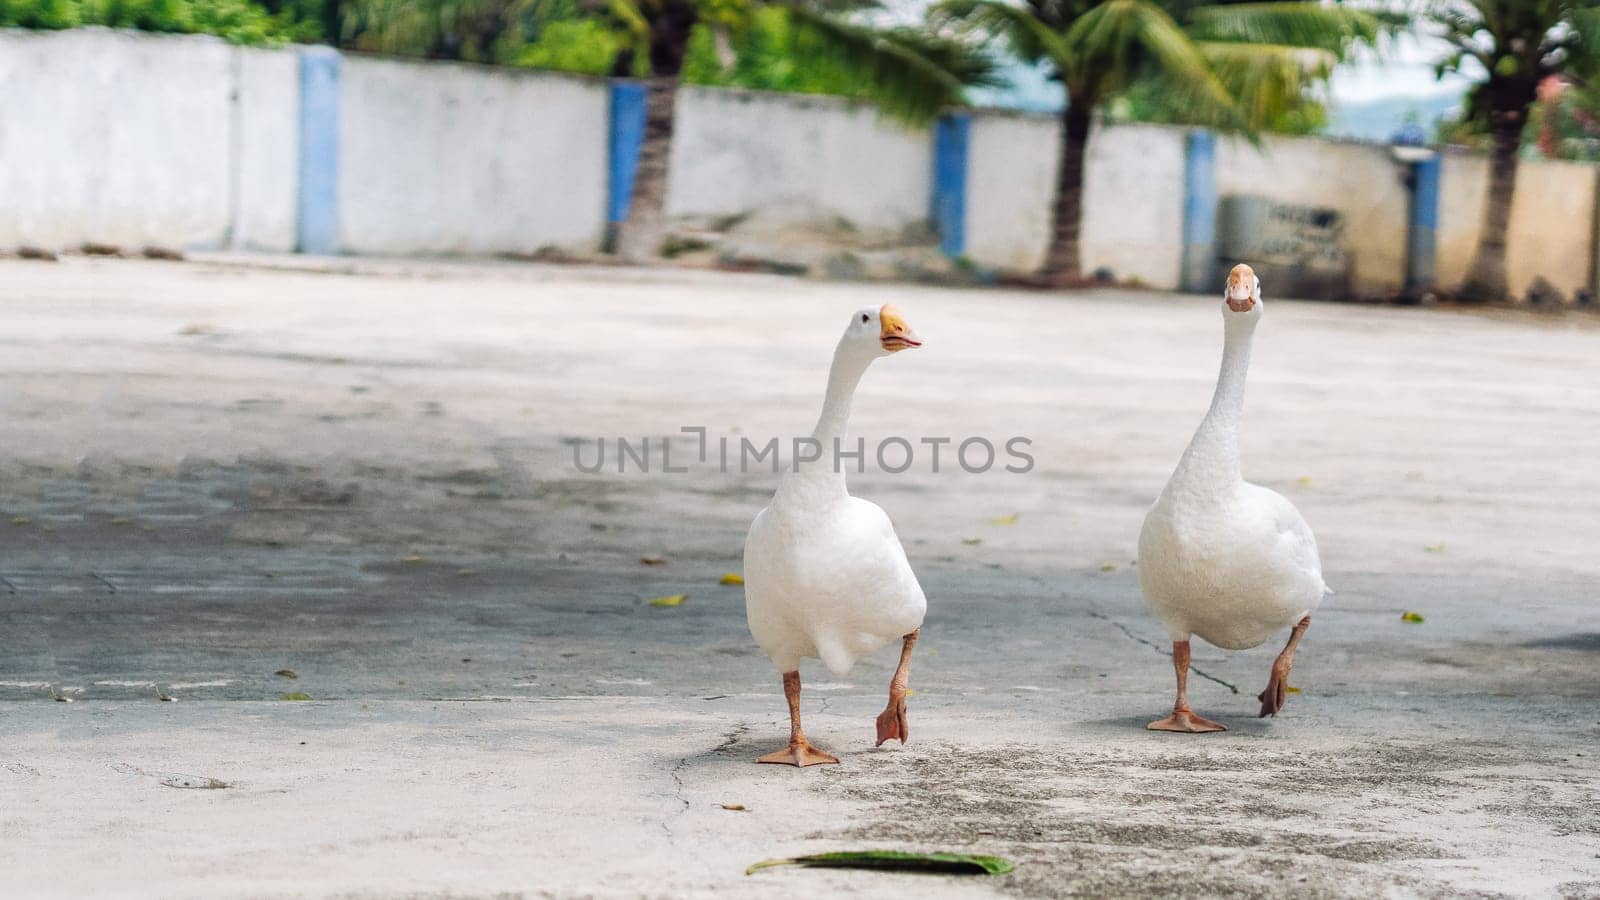 Several white geese walking together in small city. Craned necks. Summer mood, live close to domestic farm animals. Funny couple of friends by nandrey85